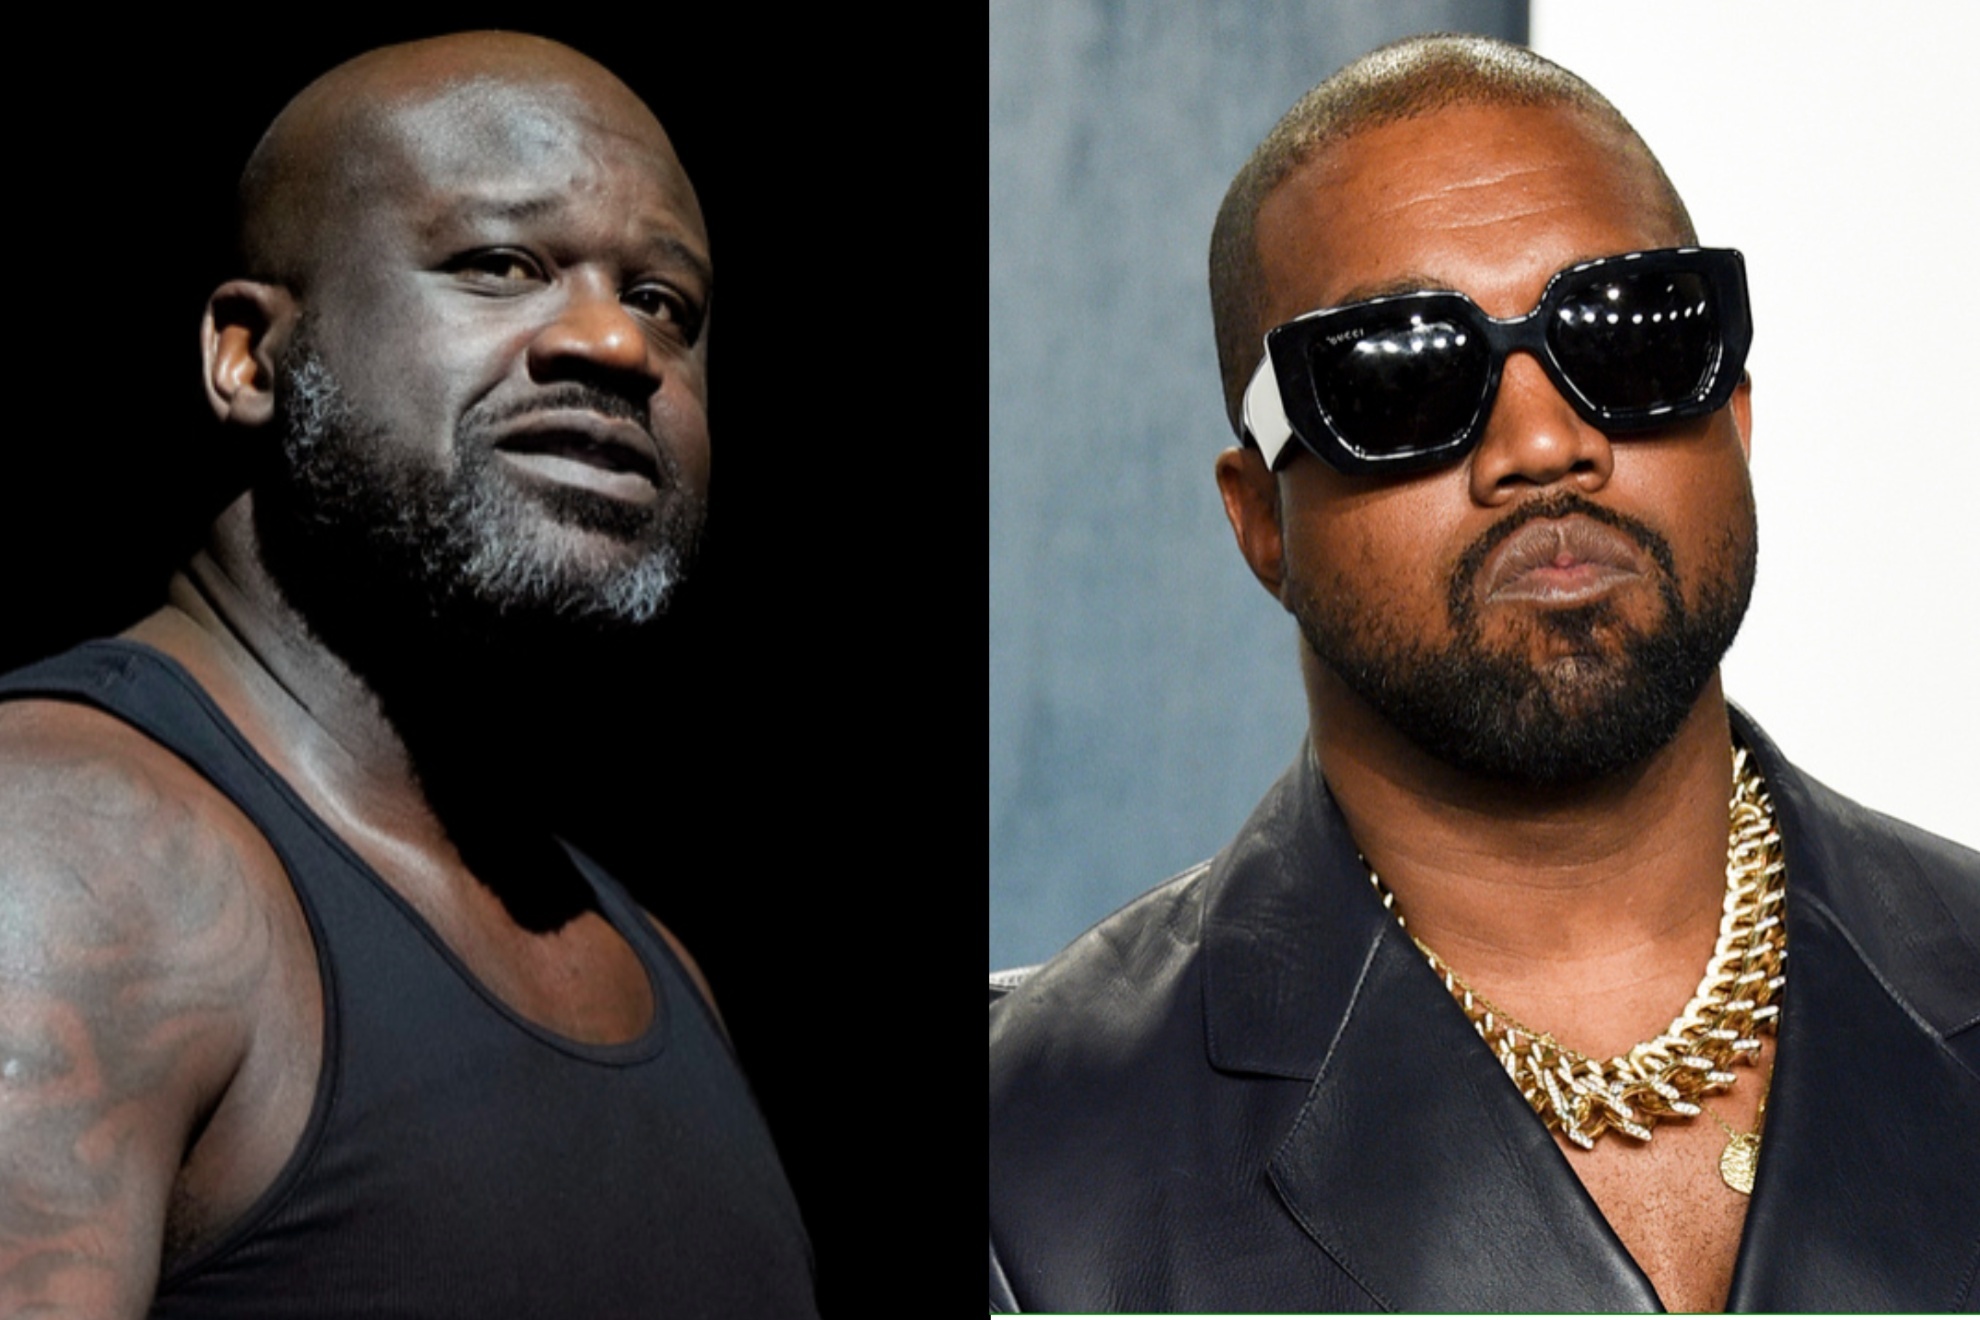 NBA legend Shaquille ONeal lashed out at Kanye West on social media